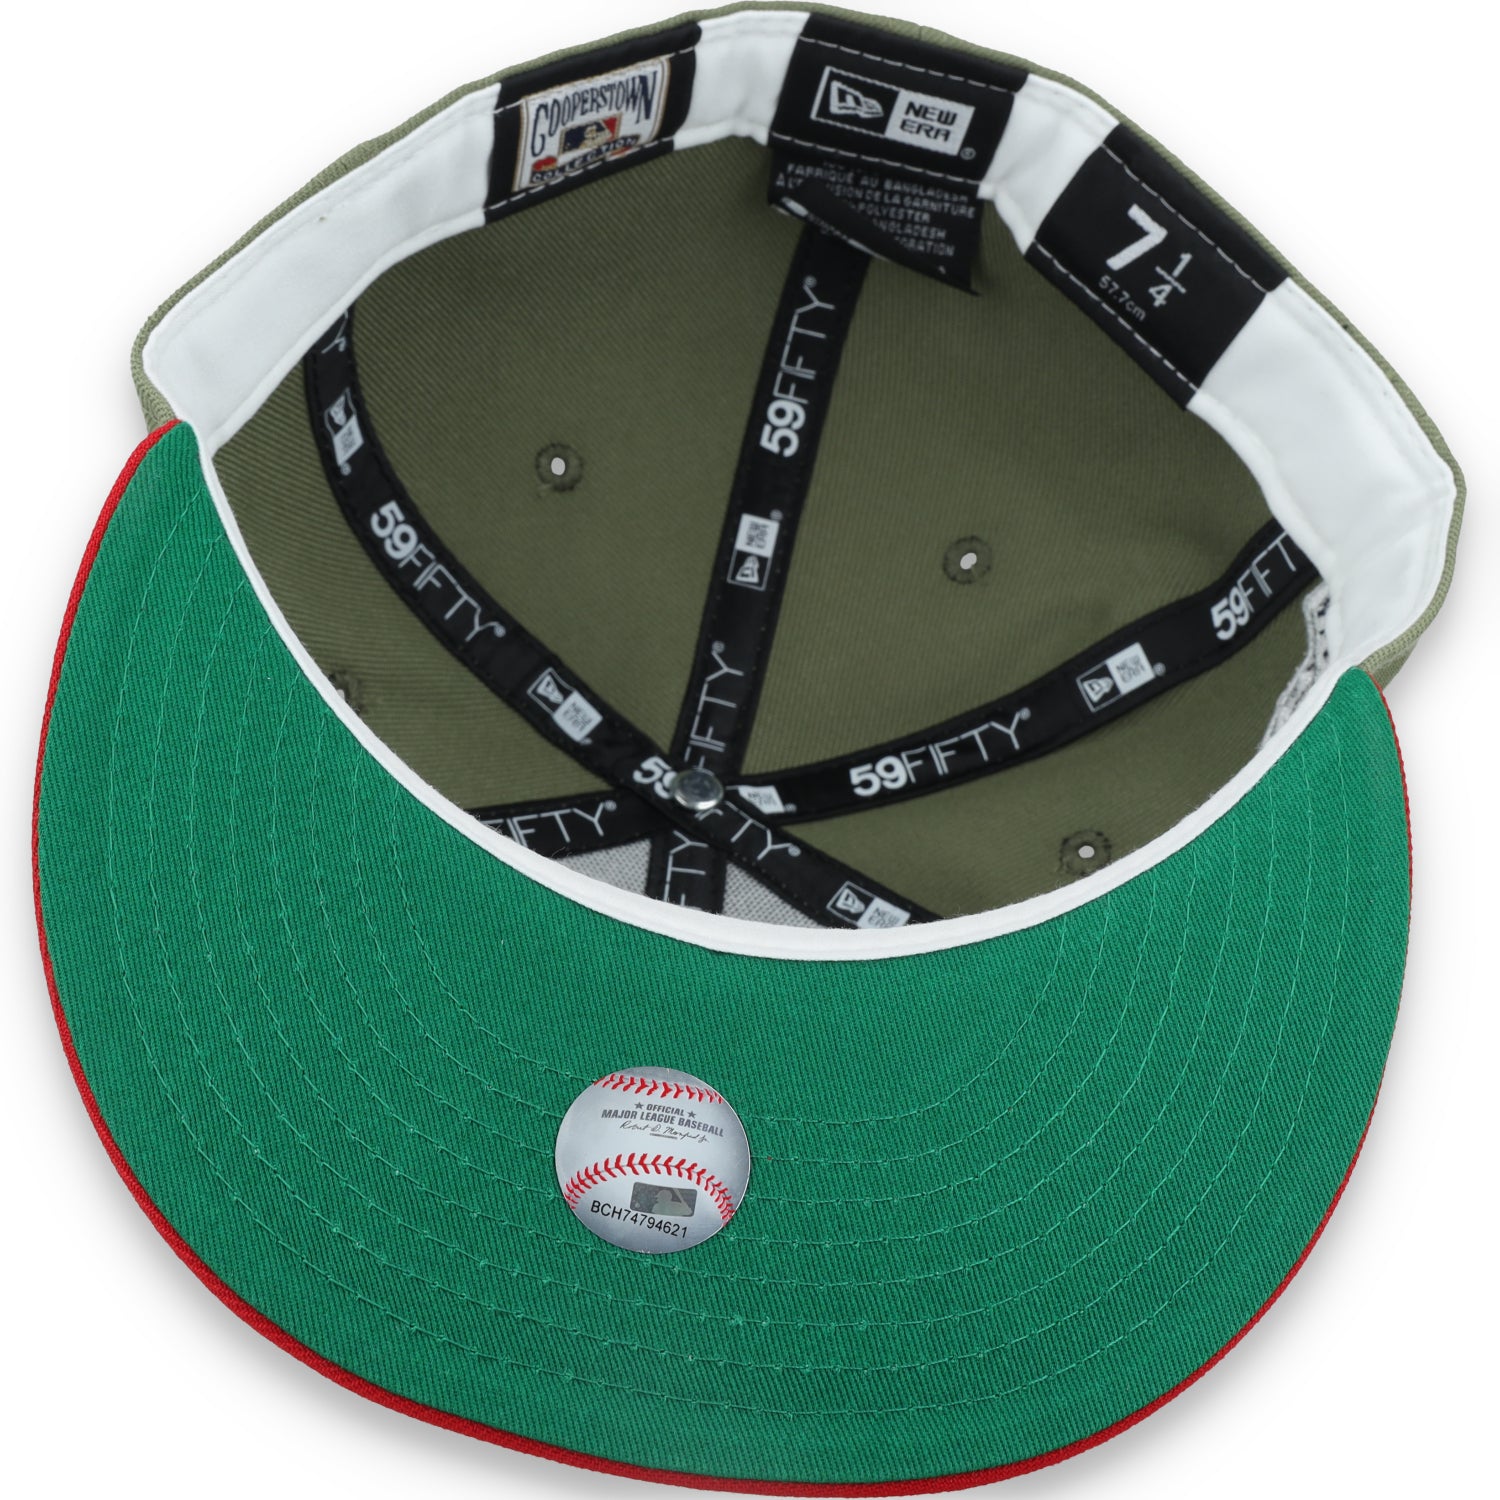 New Era Washington Nationals 2018 All Star Game Side Patch 59FIFTY Fitted Hat- Olive Gren